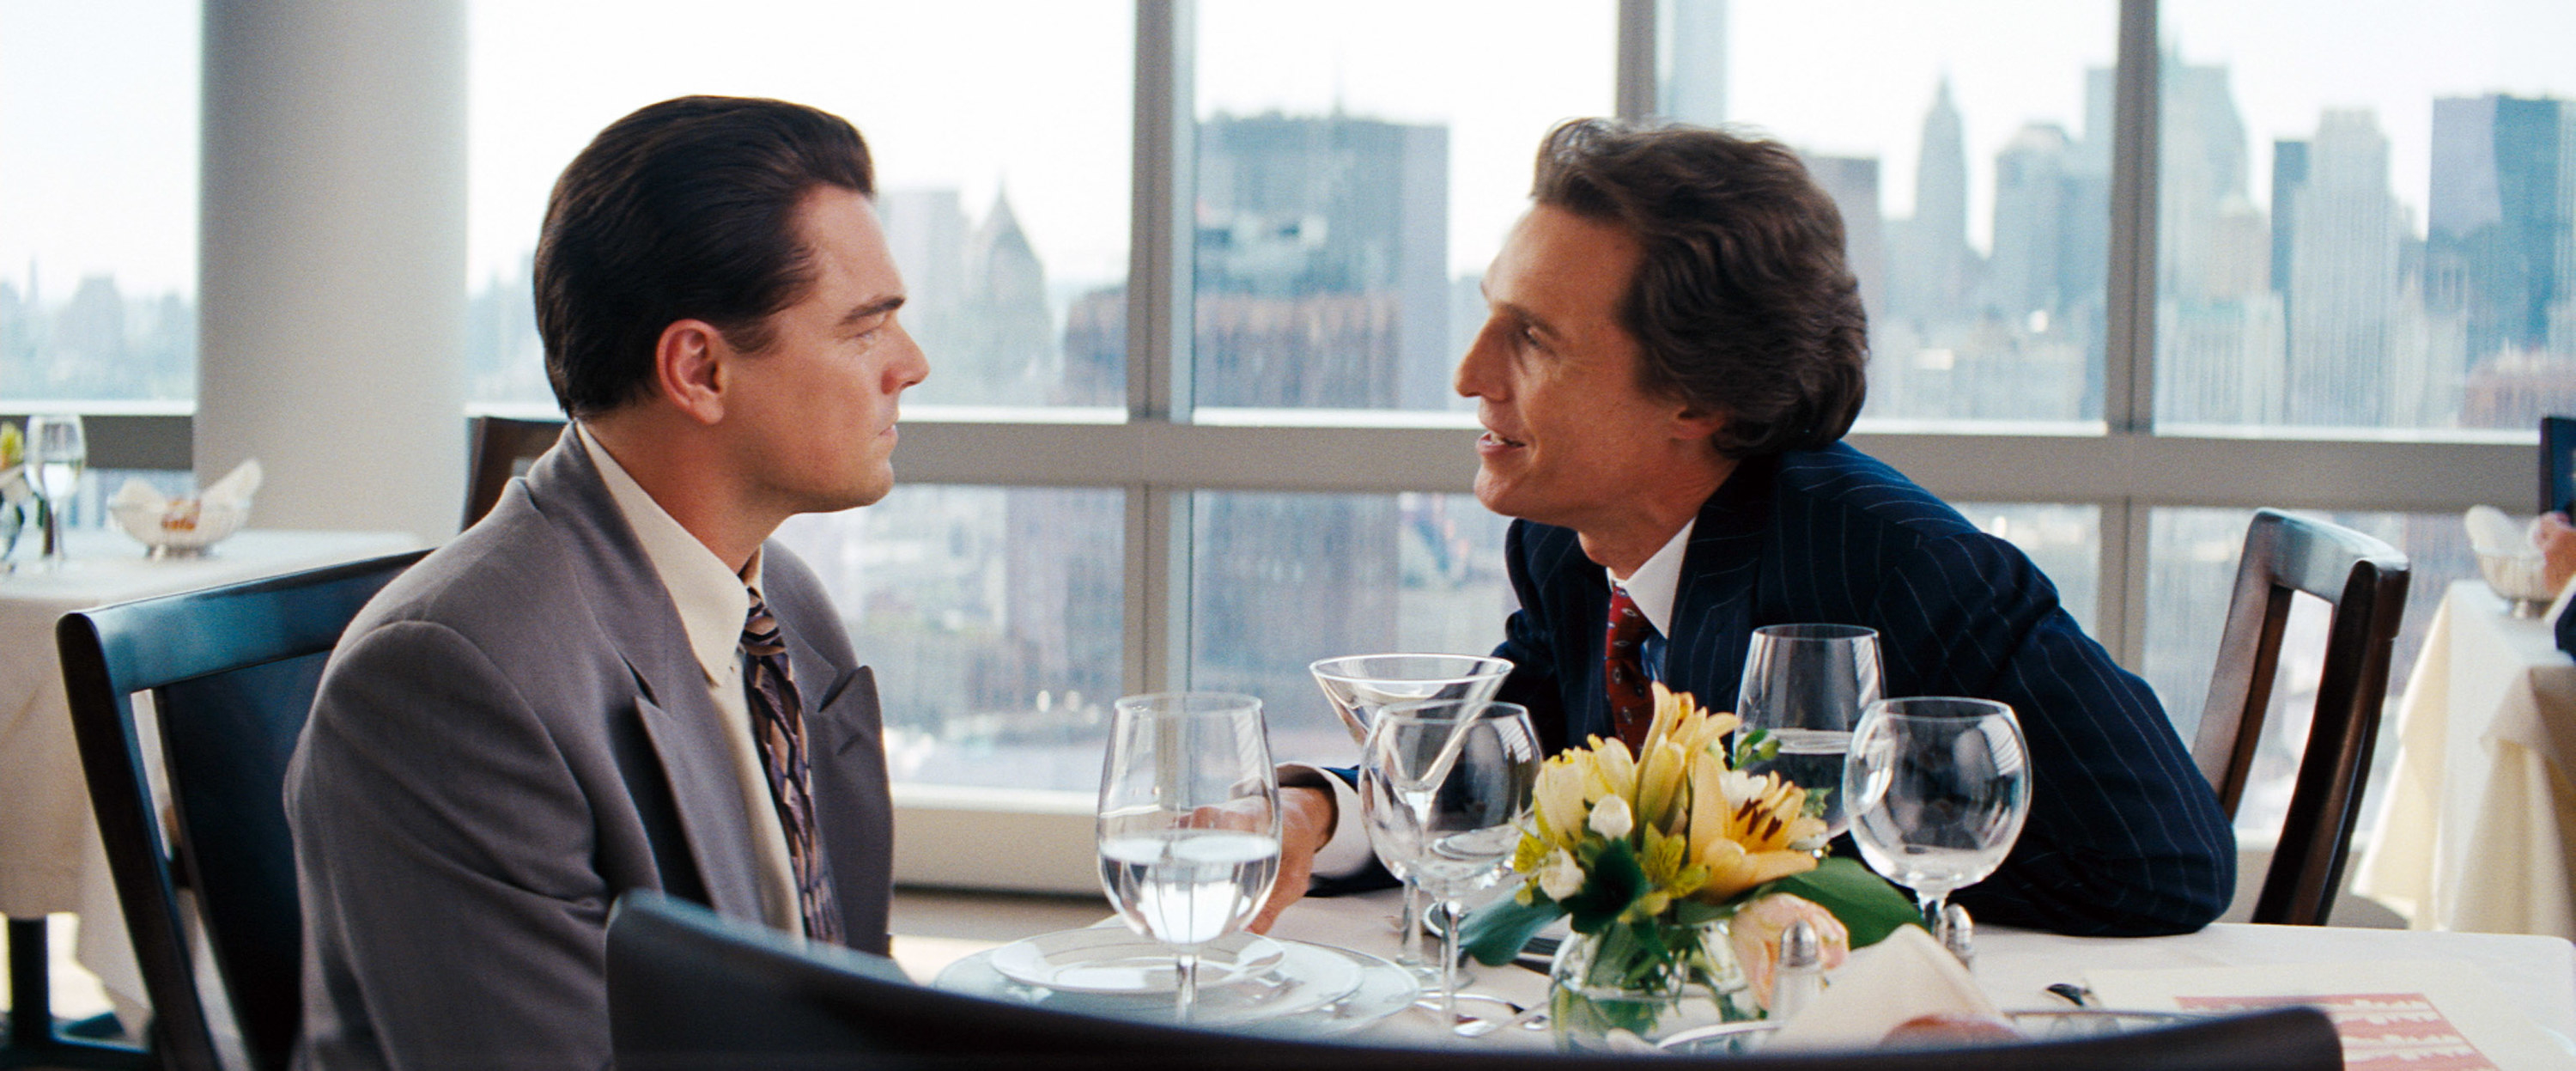 DiCaprio and McConaughey during the chest pounding lunch scene